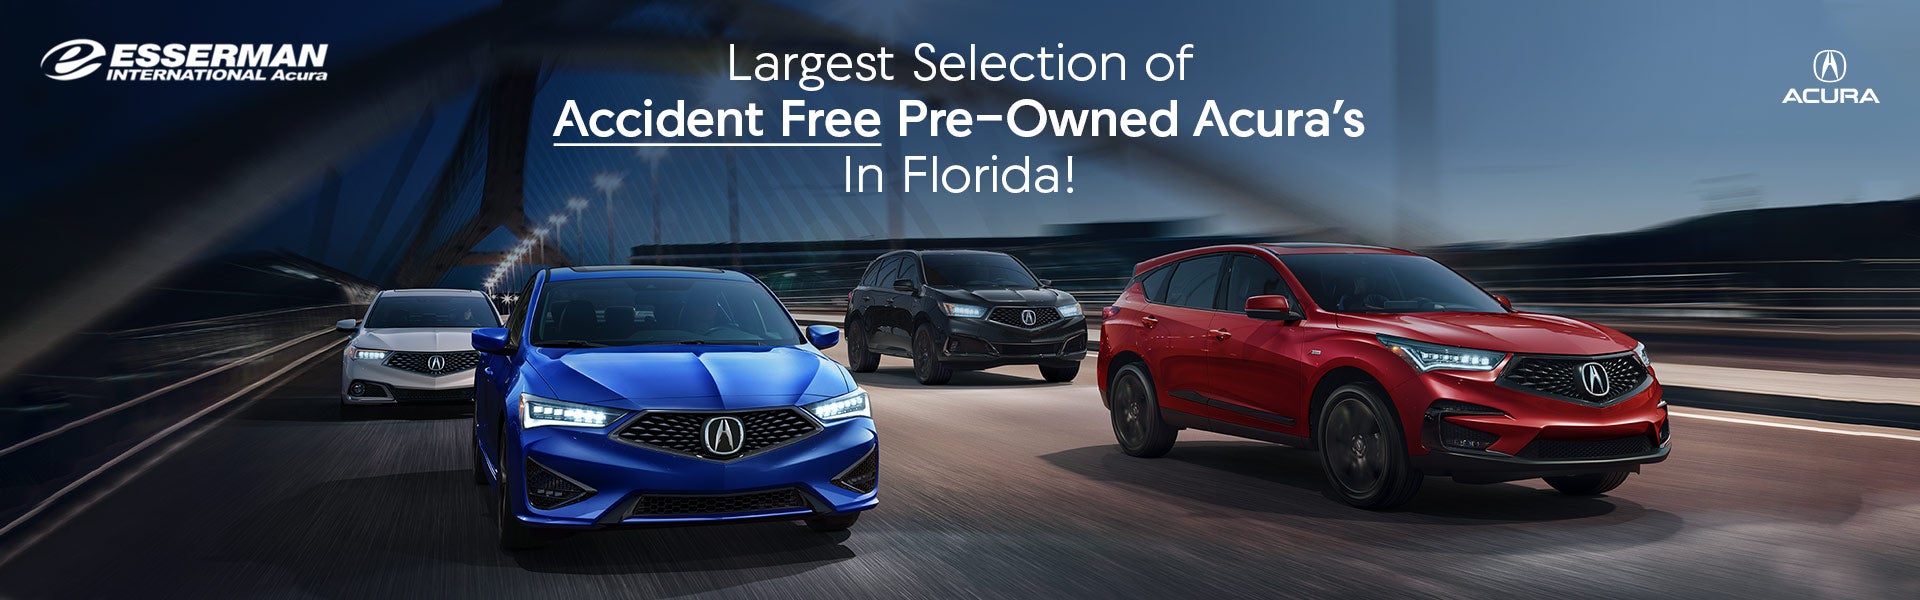 Largets Selection of Accident-Free PO Acura's in Florida! 